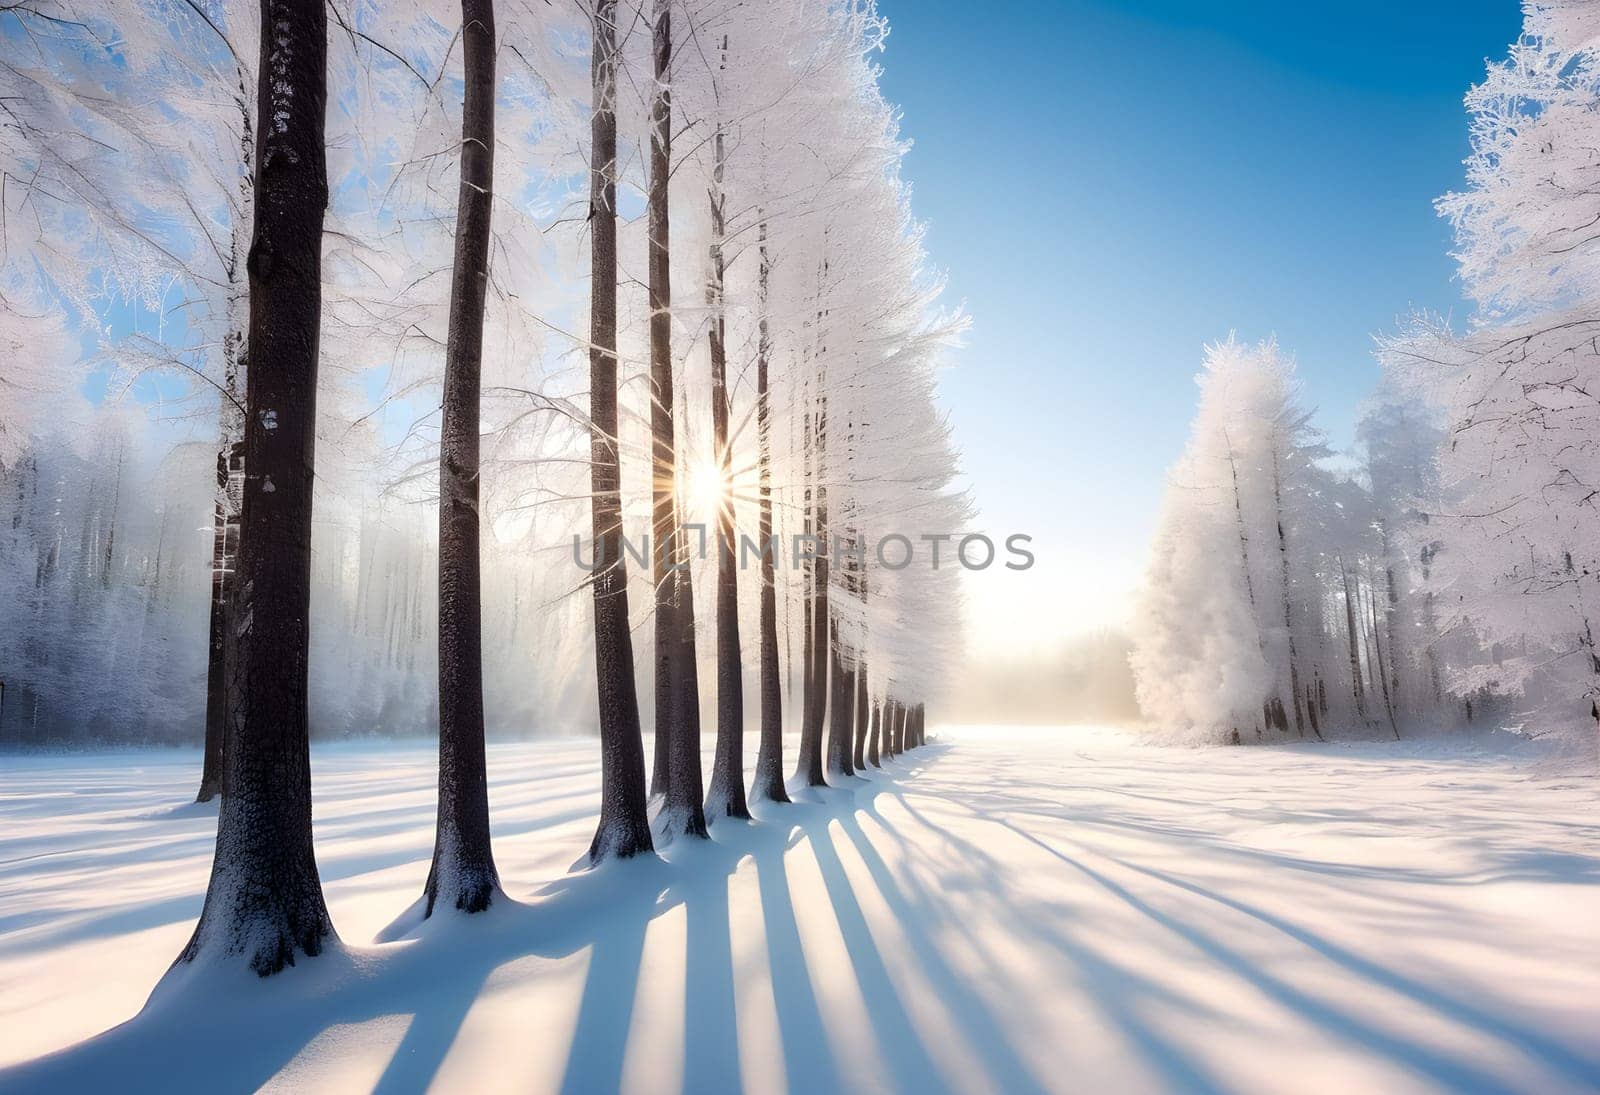 Frosty Trails: Exploring the Winter Landscape by Petrichor